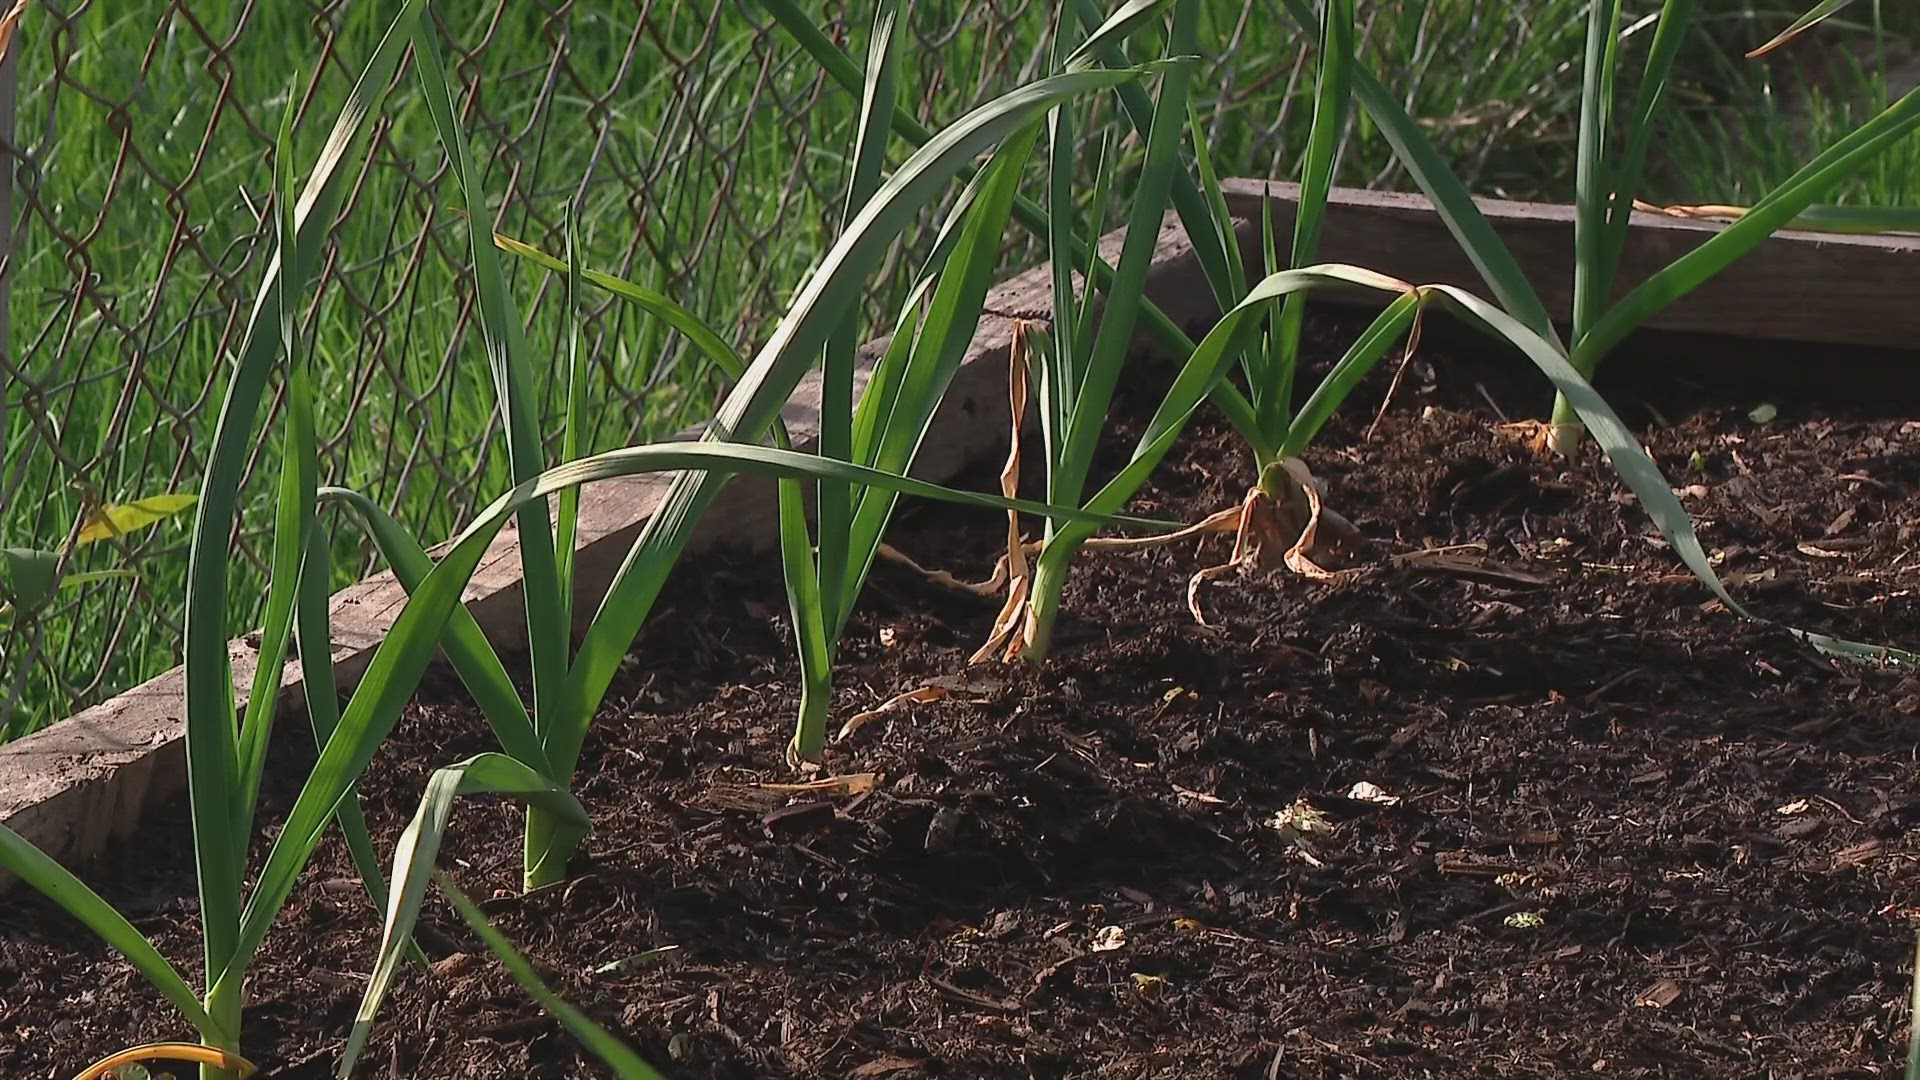 This Earth Day, you can make a difference in your home and community by picking up composting.